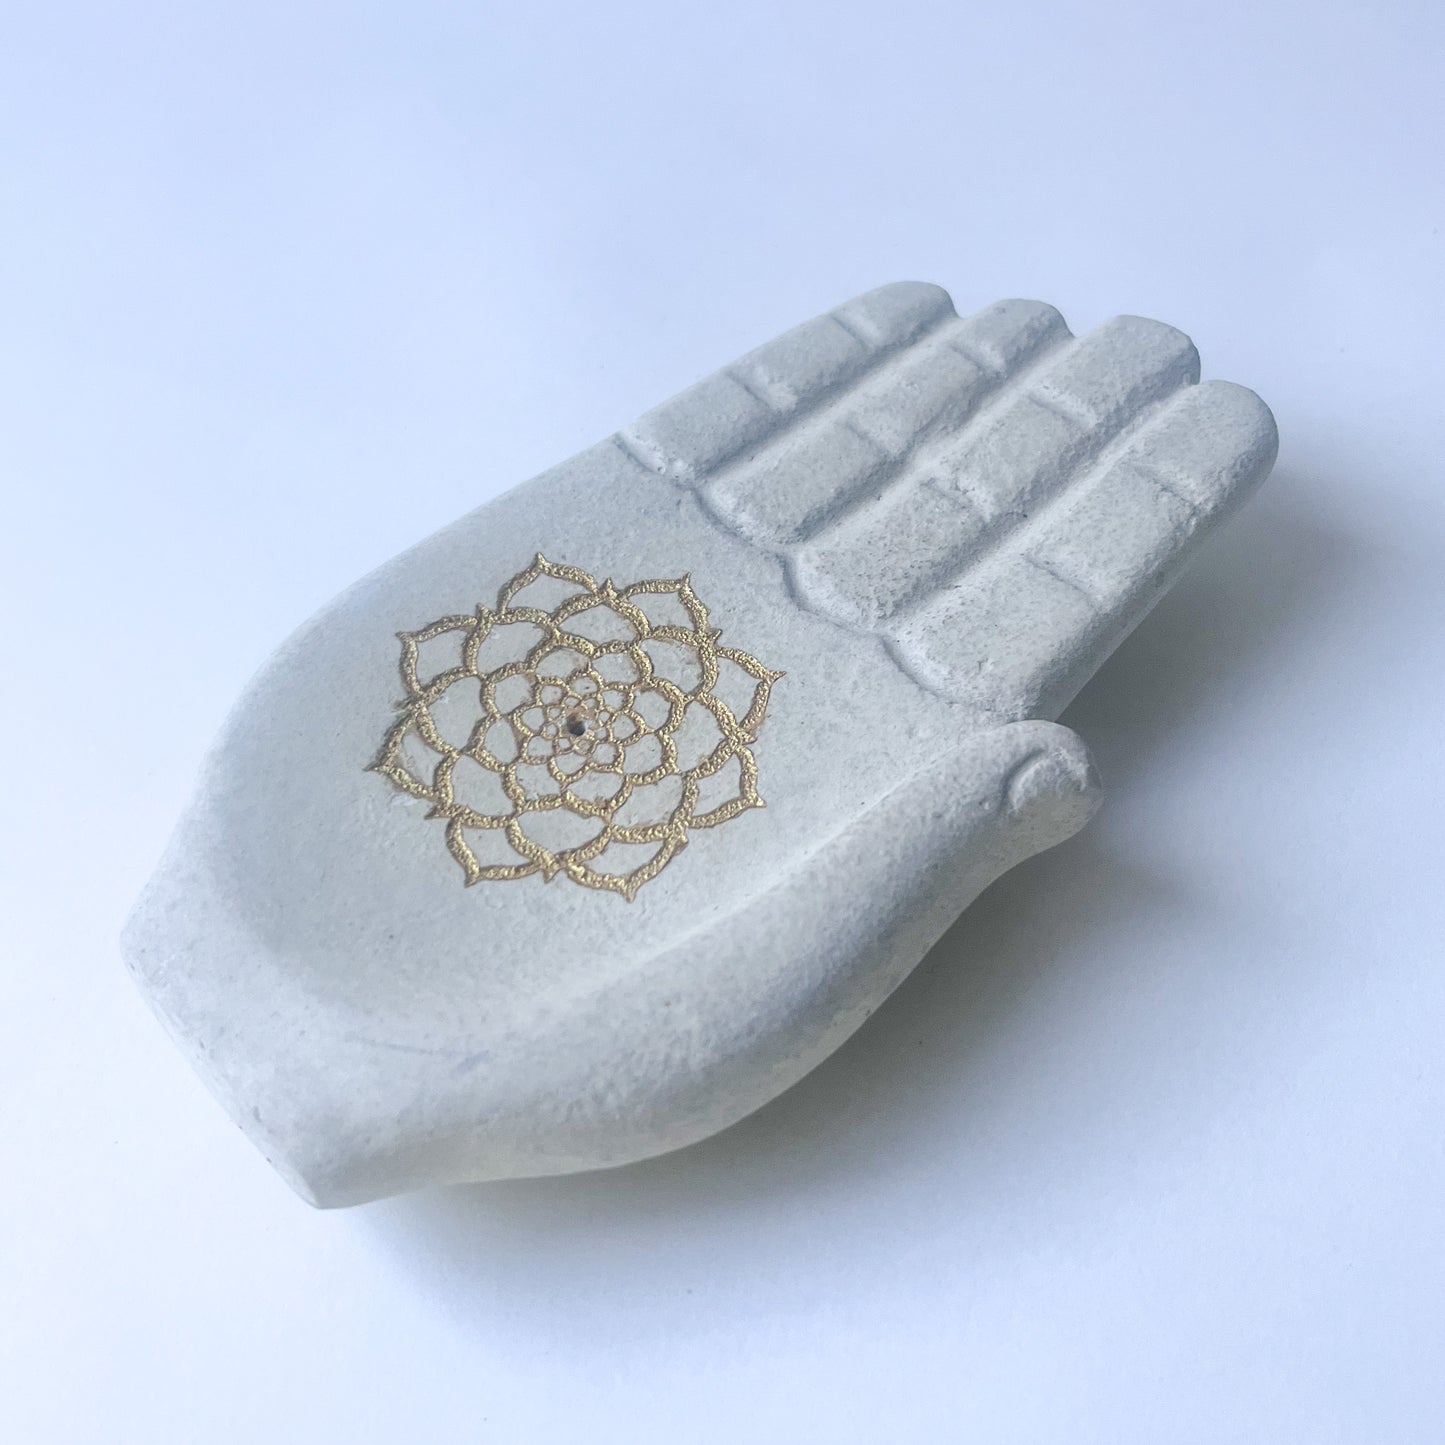 Stone Incense Holder - Hand with Lotus Engraved